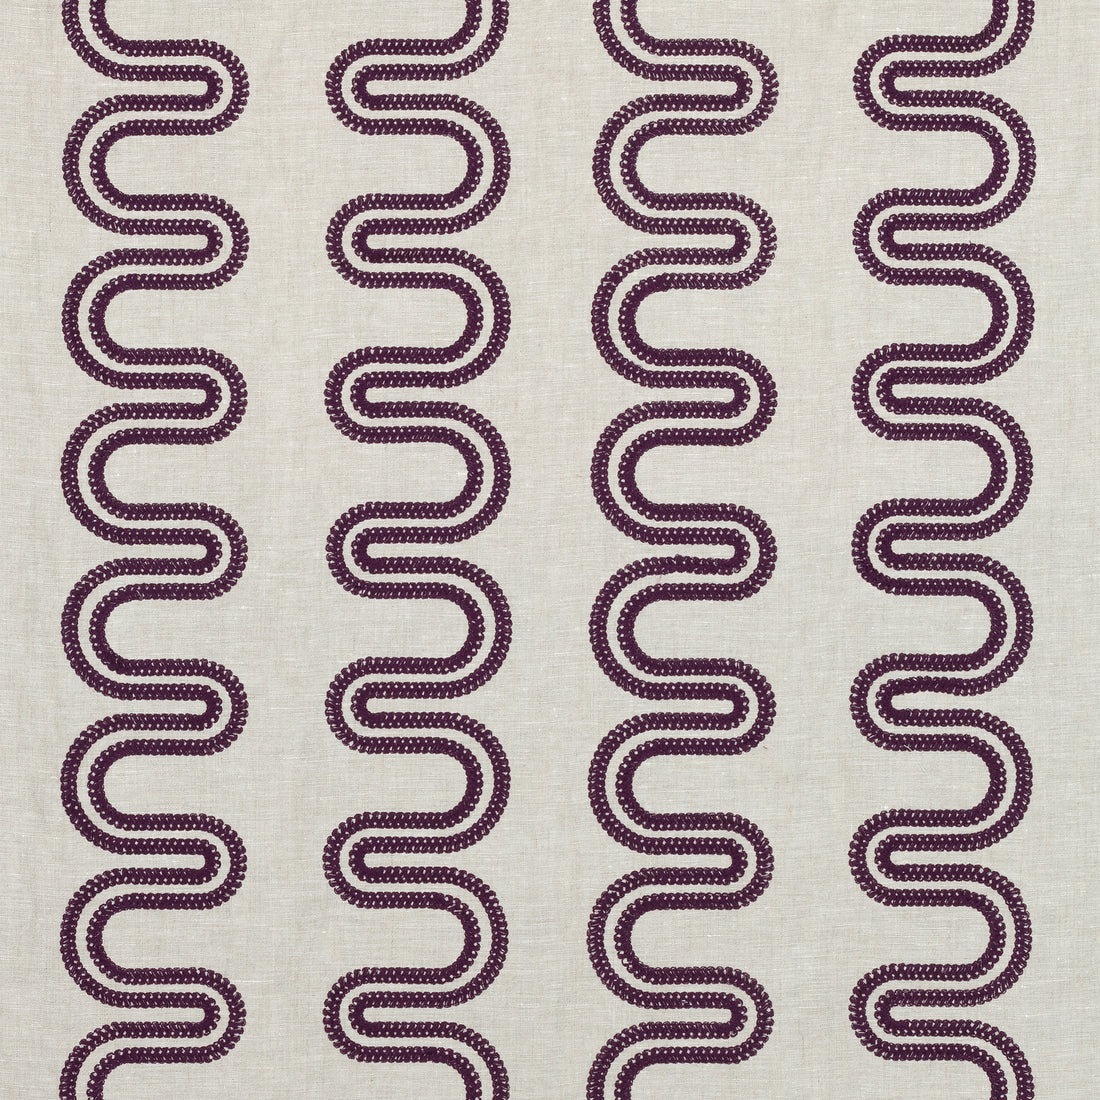 Herriot Way Embroidery fabric in plum on flax  color - pattern number AF9638 - by Anna French in the Savoy collection